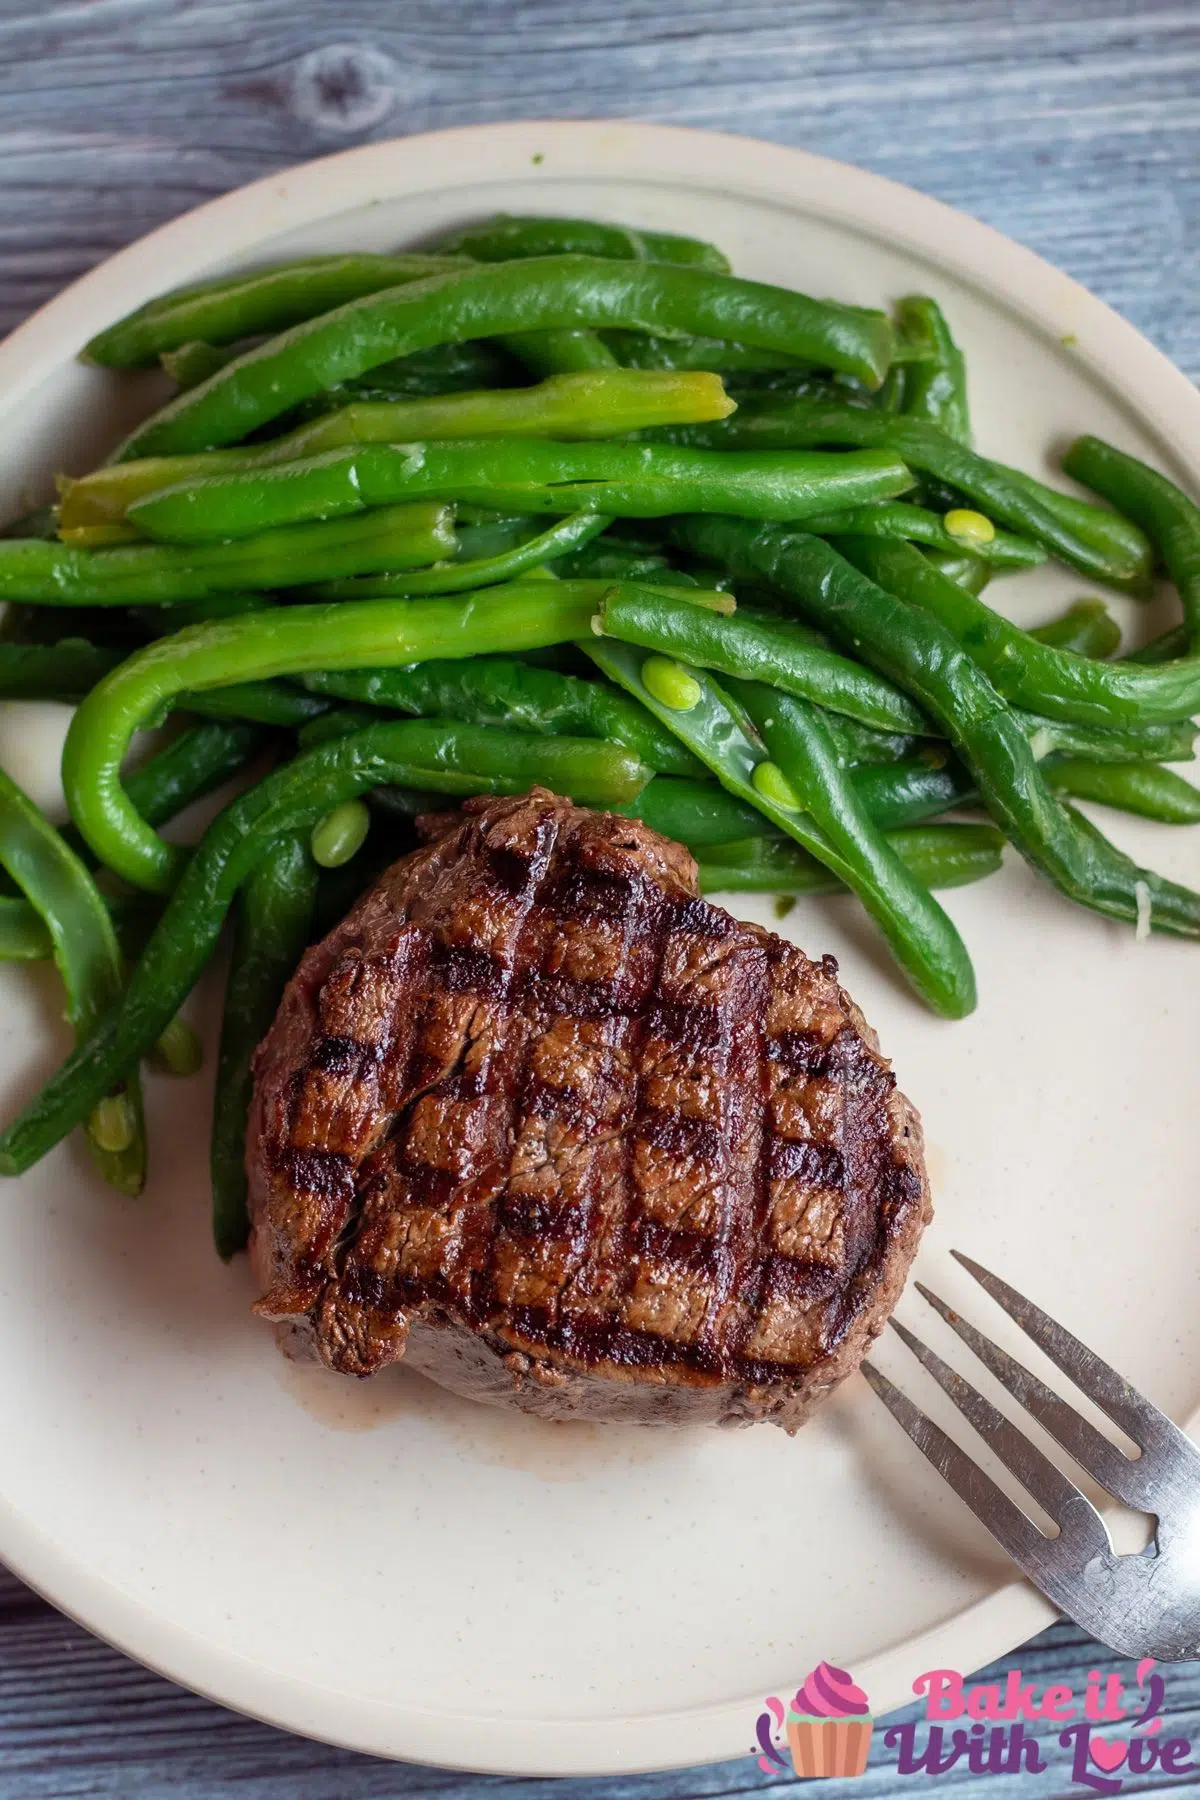 Tall image of grilled filet mignon on a plate with green beans.